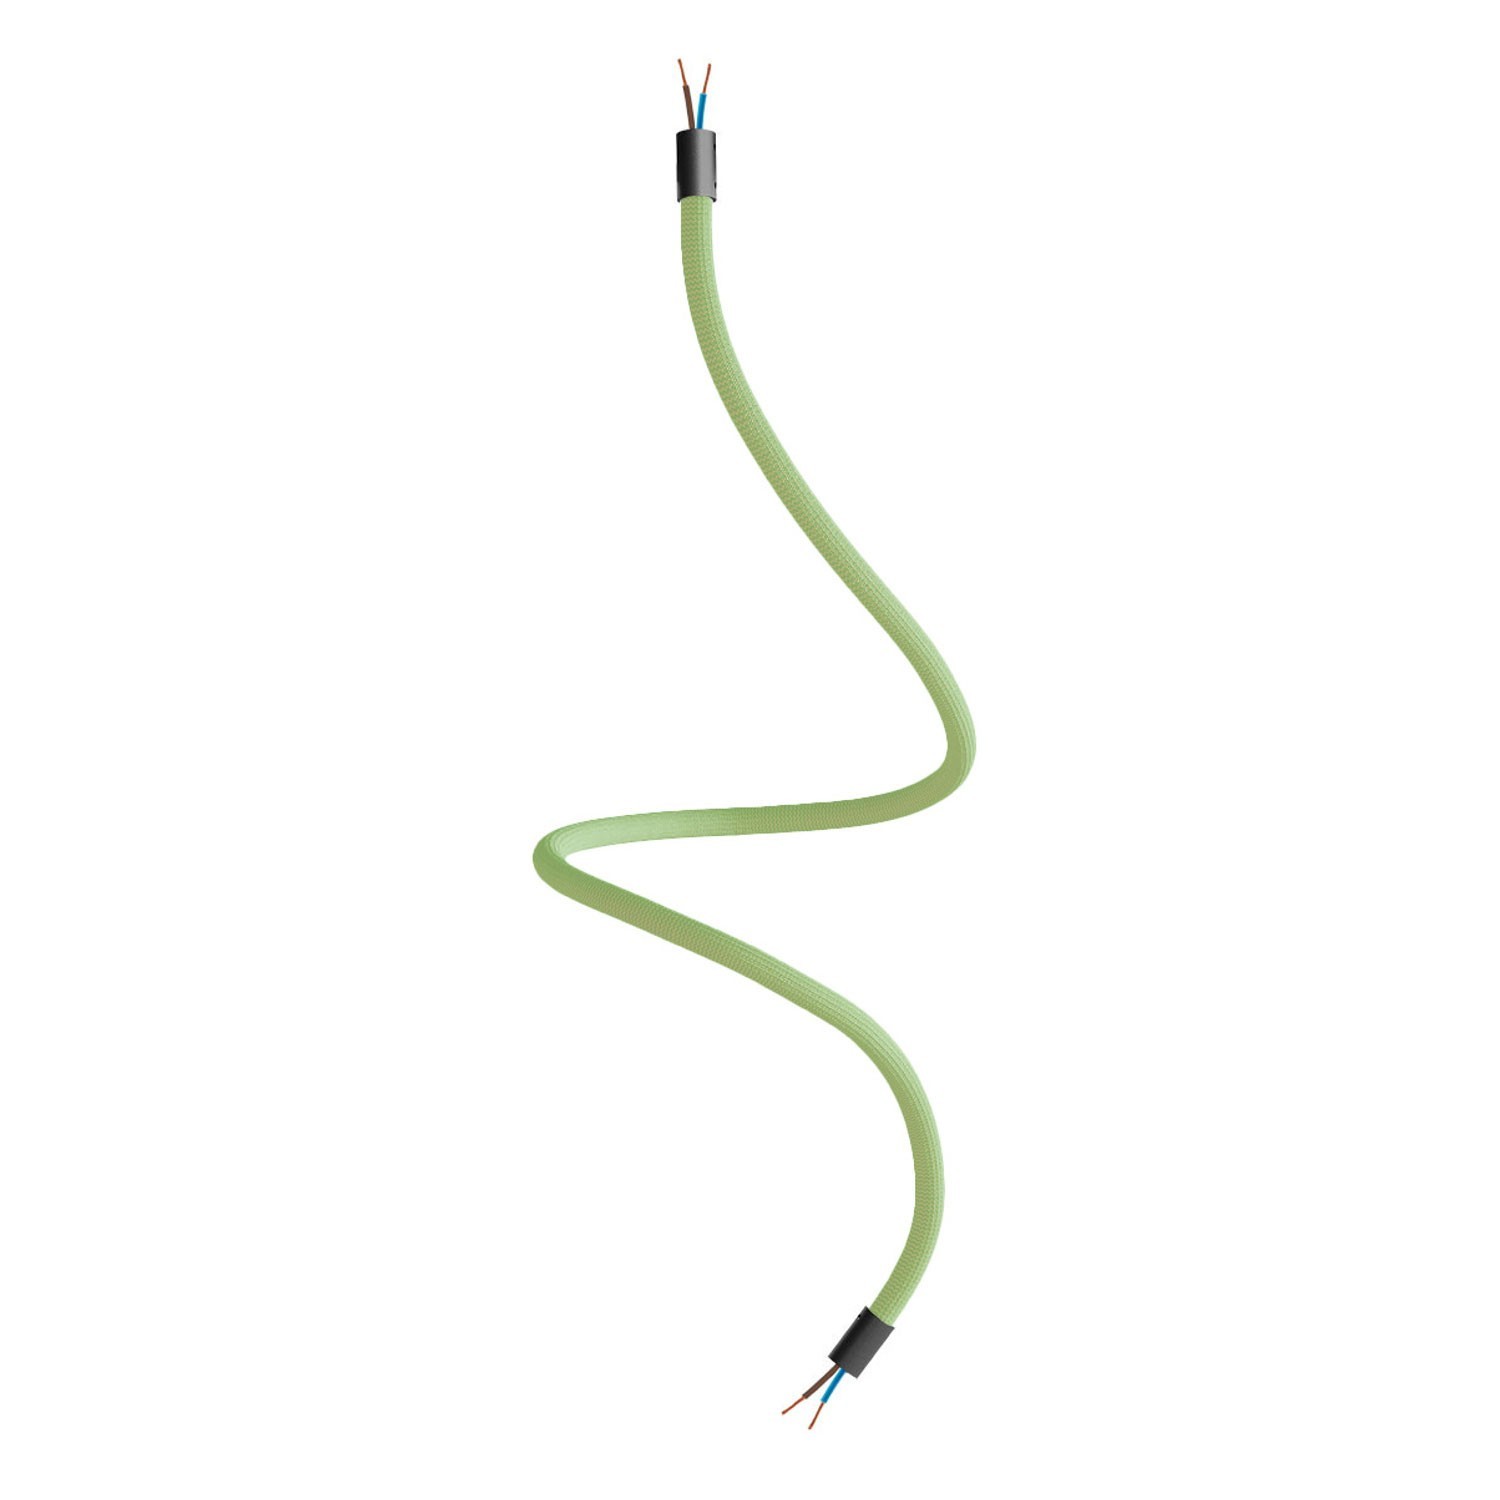 Kit Creative Flex flexible tube with grass green RM77 textile lining and metal terminals